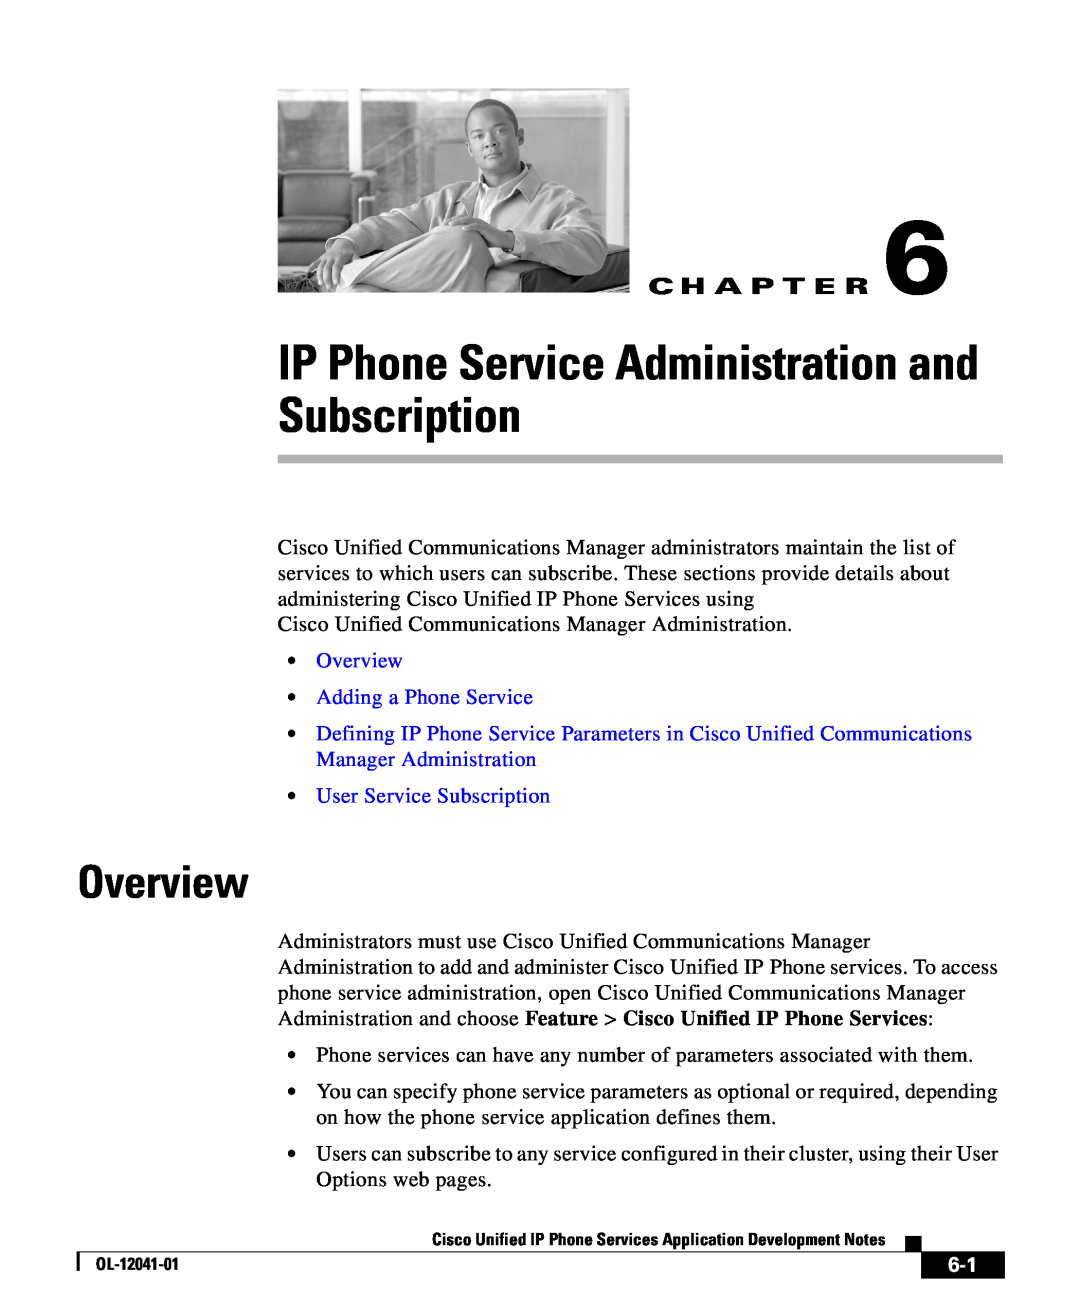 Cisco Systems OL-12041-01 user service IP Phone Service Administration and Subscription, Overview, C H A P T E R 